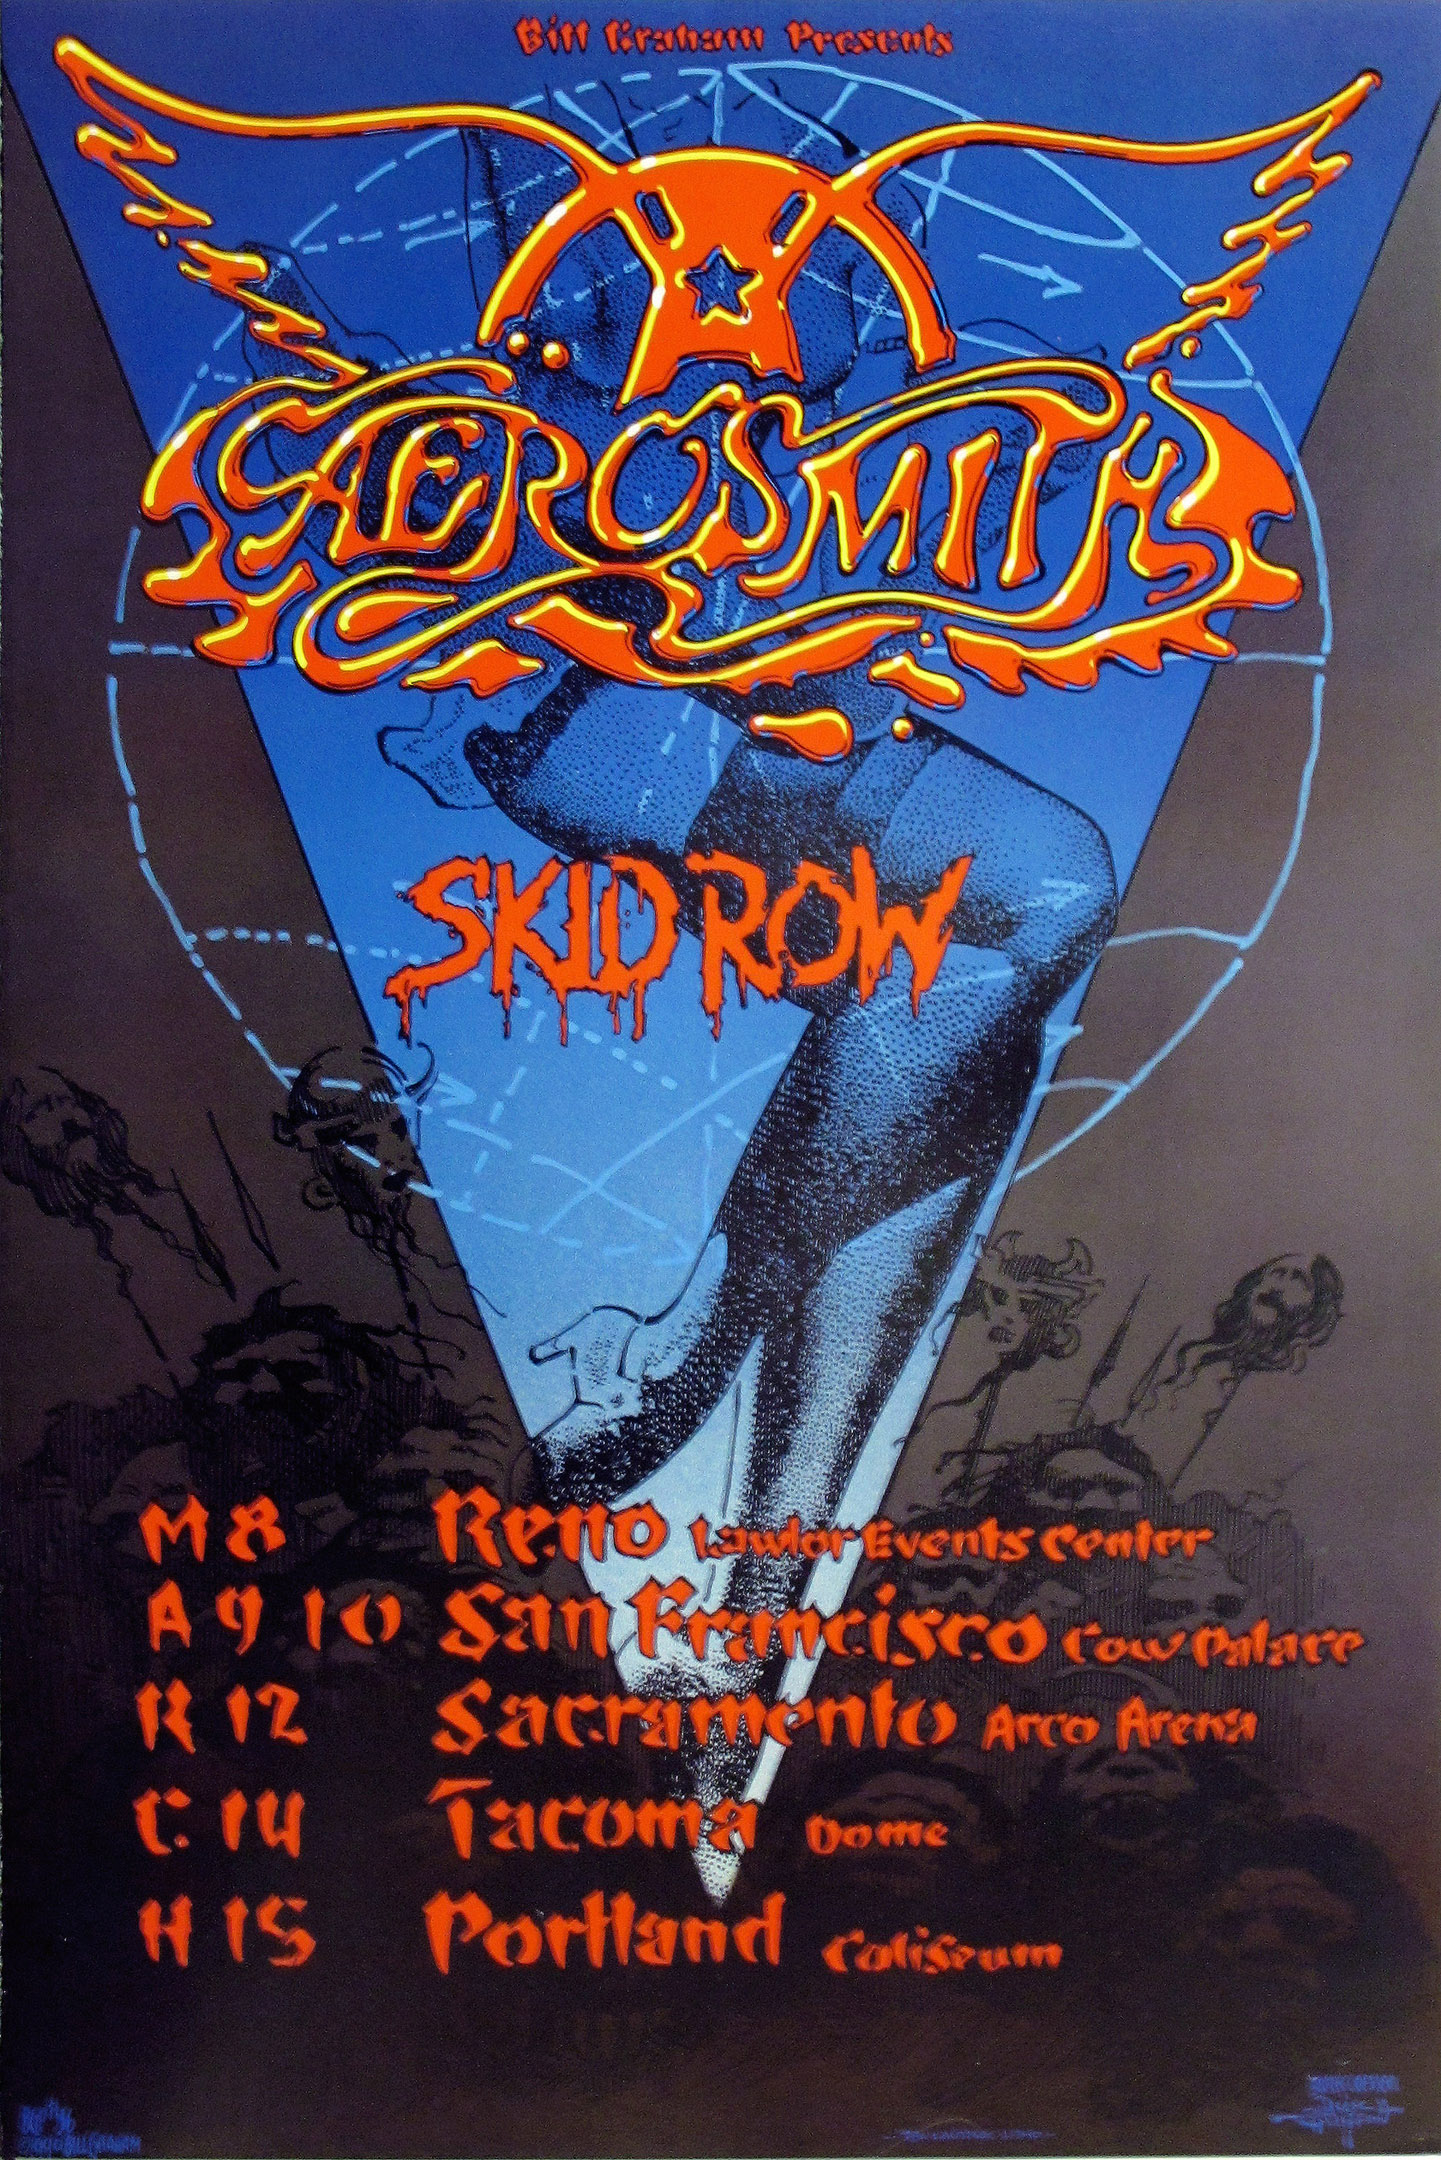 Aerosmith And Skid Row Concert Poster